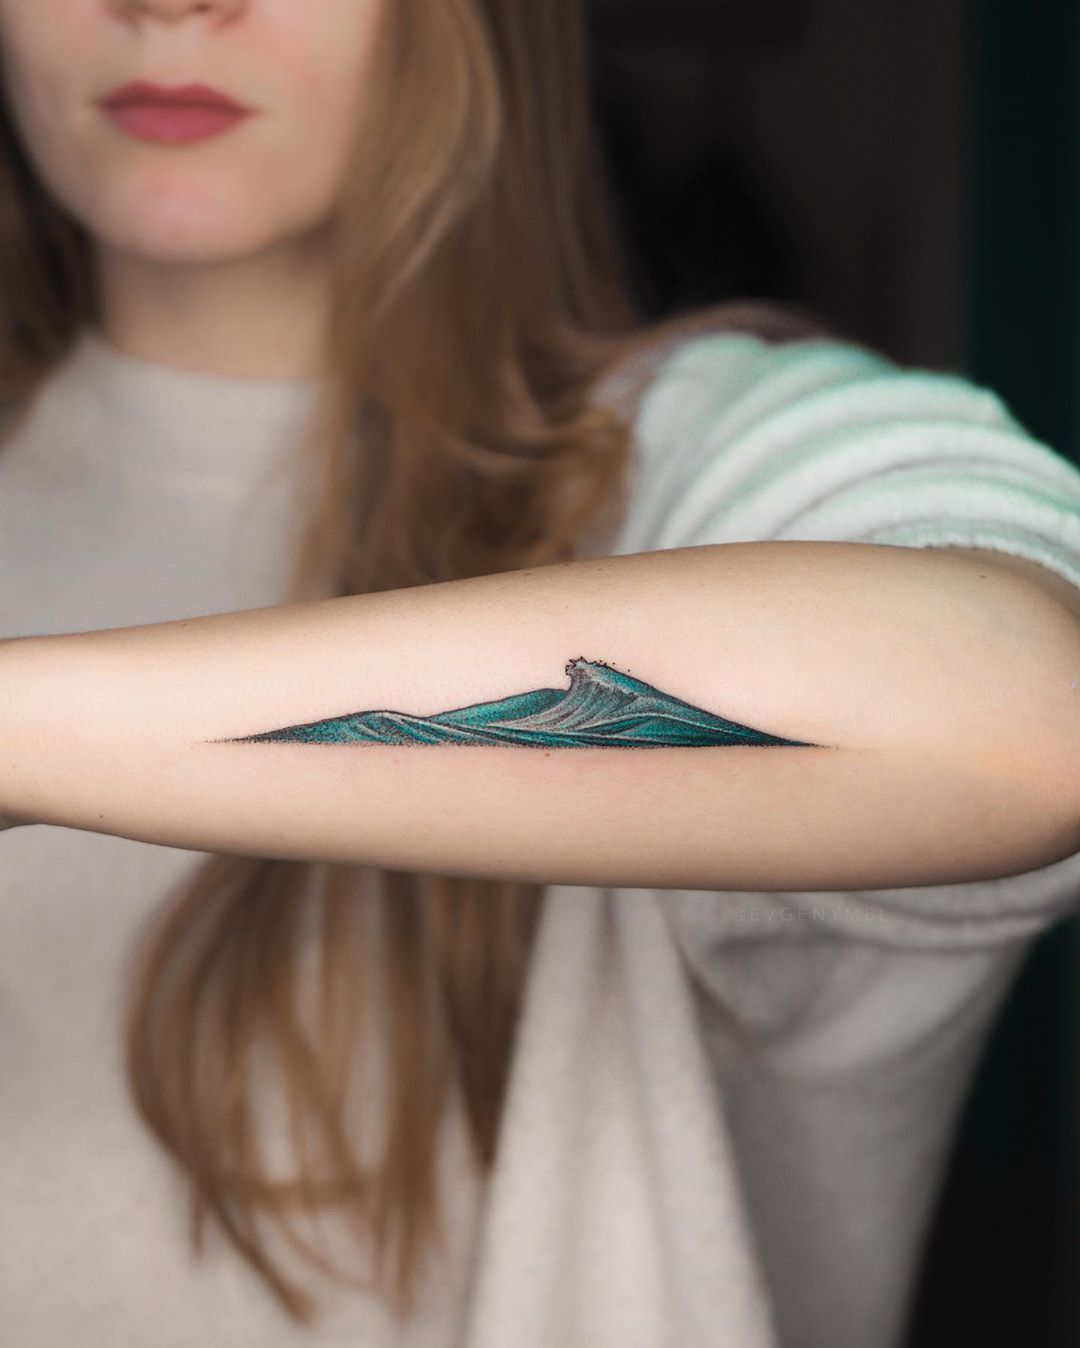 Wave Tattoos Designs, Ideas and Meaning - Tattoos For You